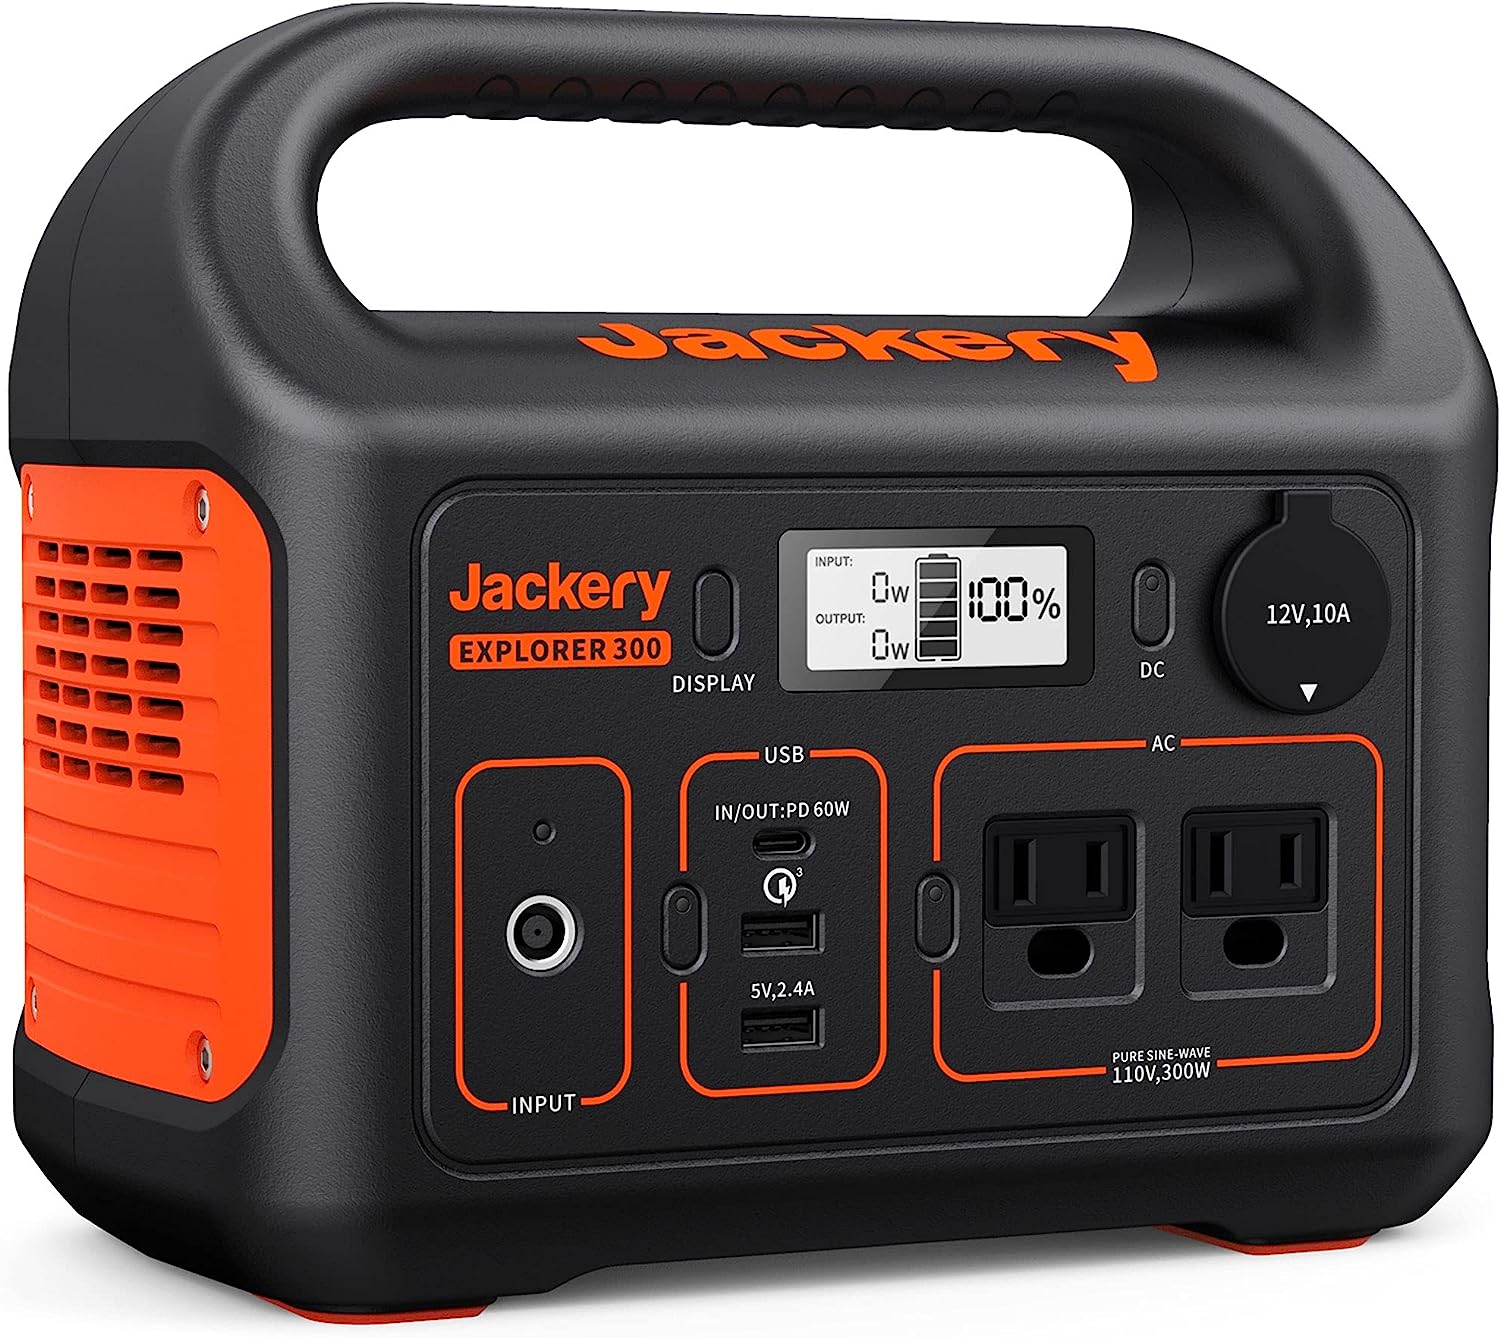 $219 Jackery Portable Power Station Explorer 300, 293Wh Backup Lithium Battery, 110V/300W Pure Sine Wave AC Outlet, Solar Generator